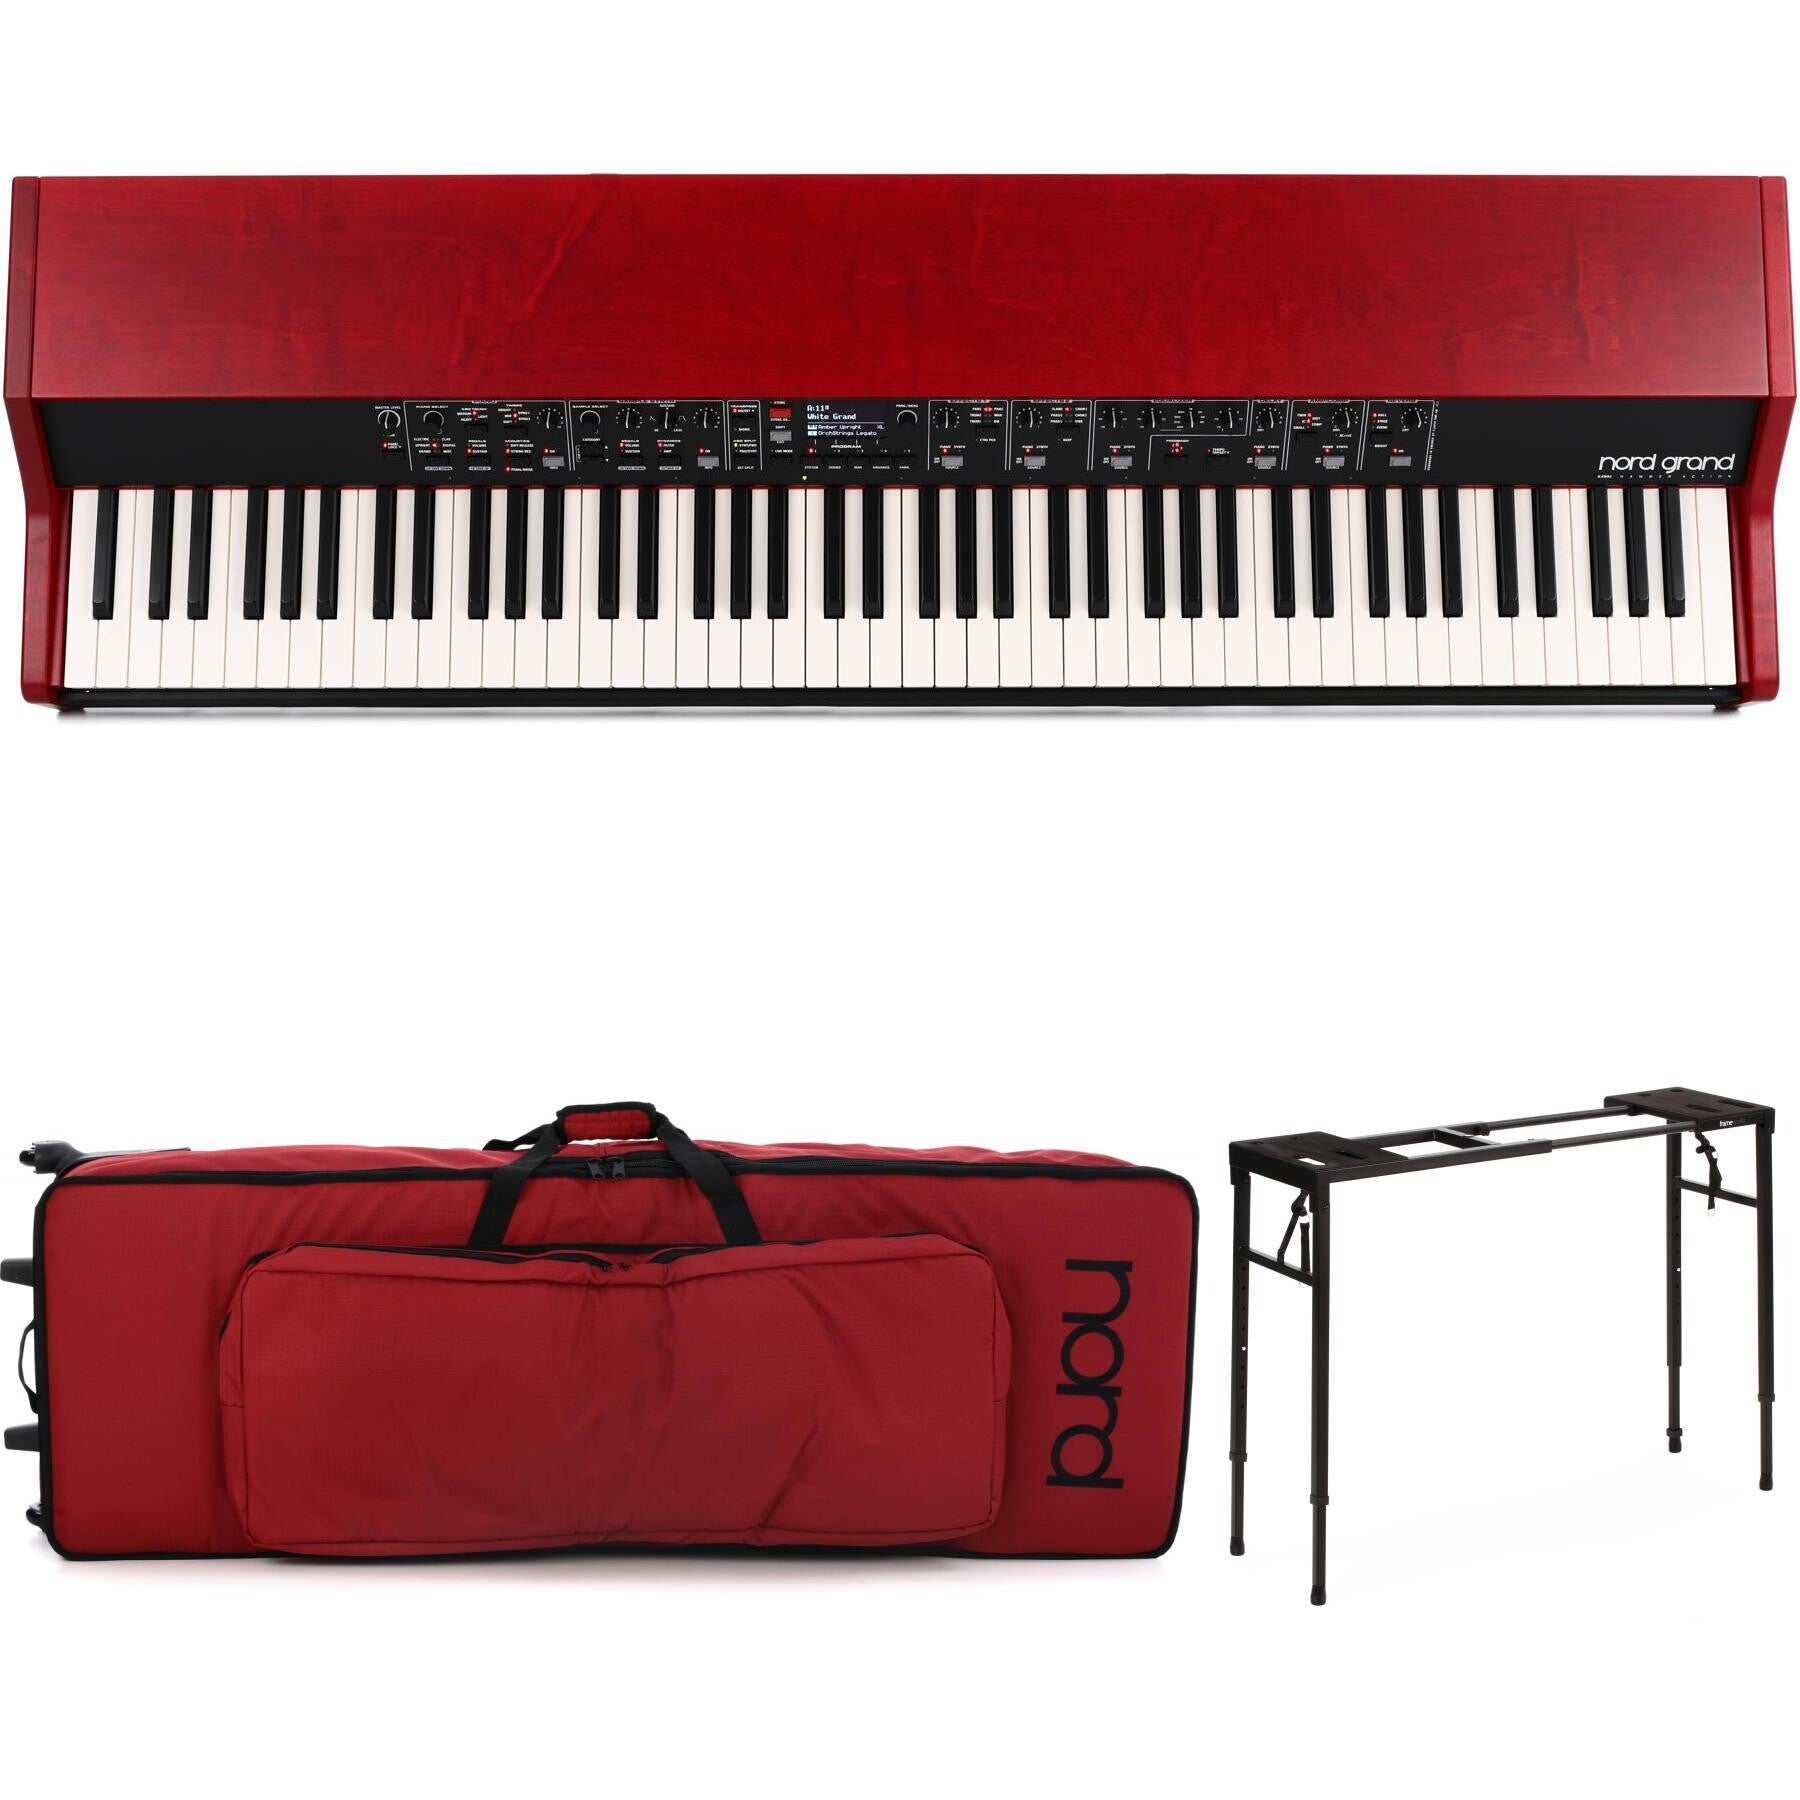 Nord Grand 88-key Stage Keyboard | Sweetwater